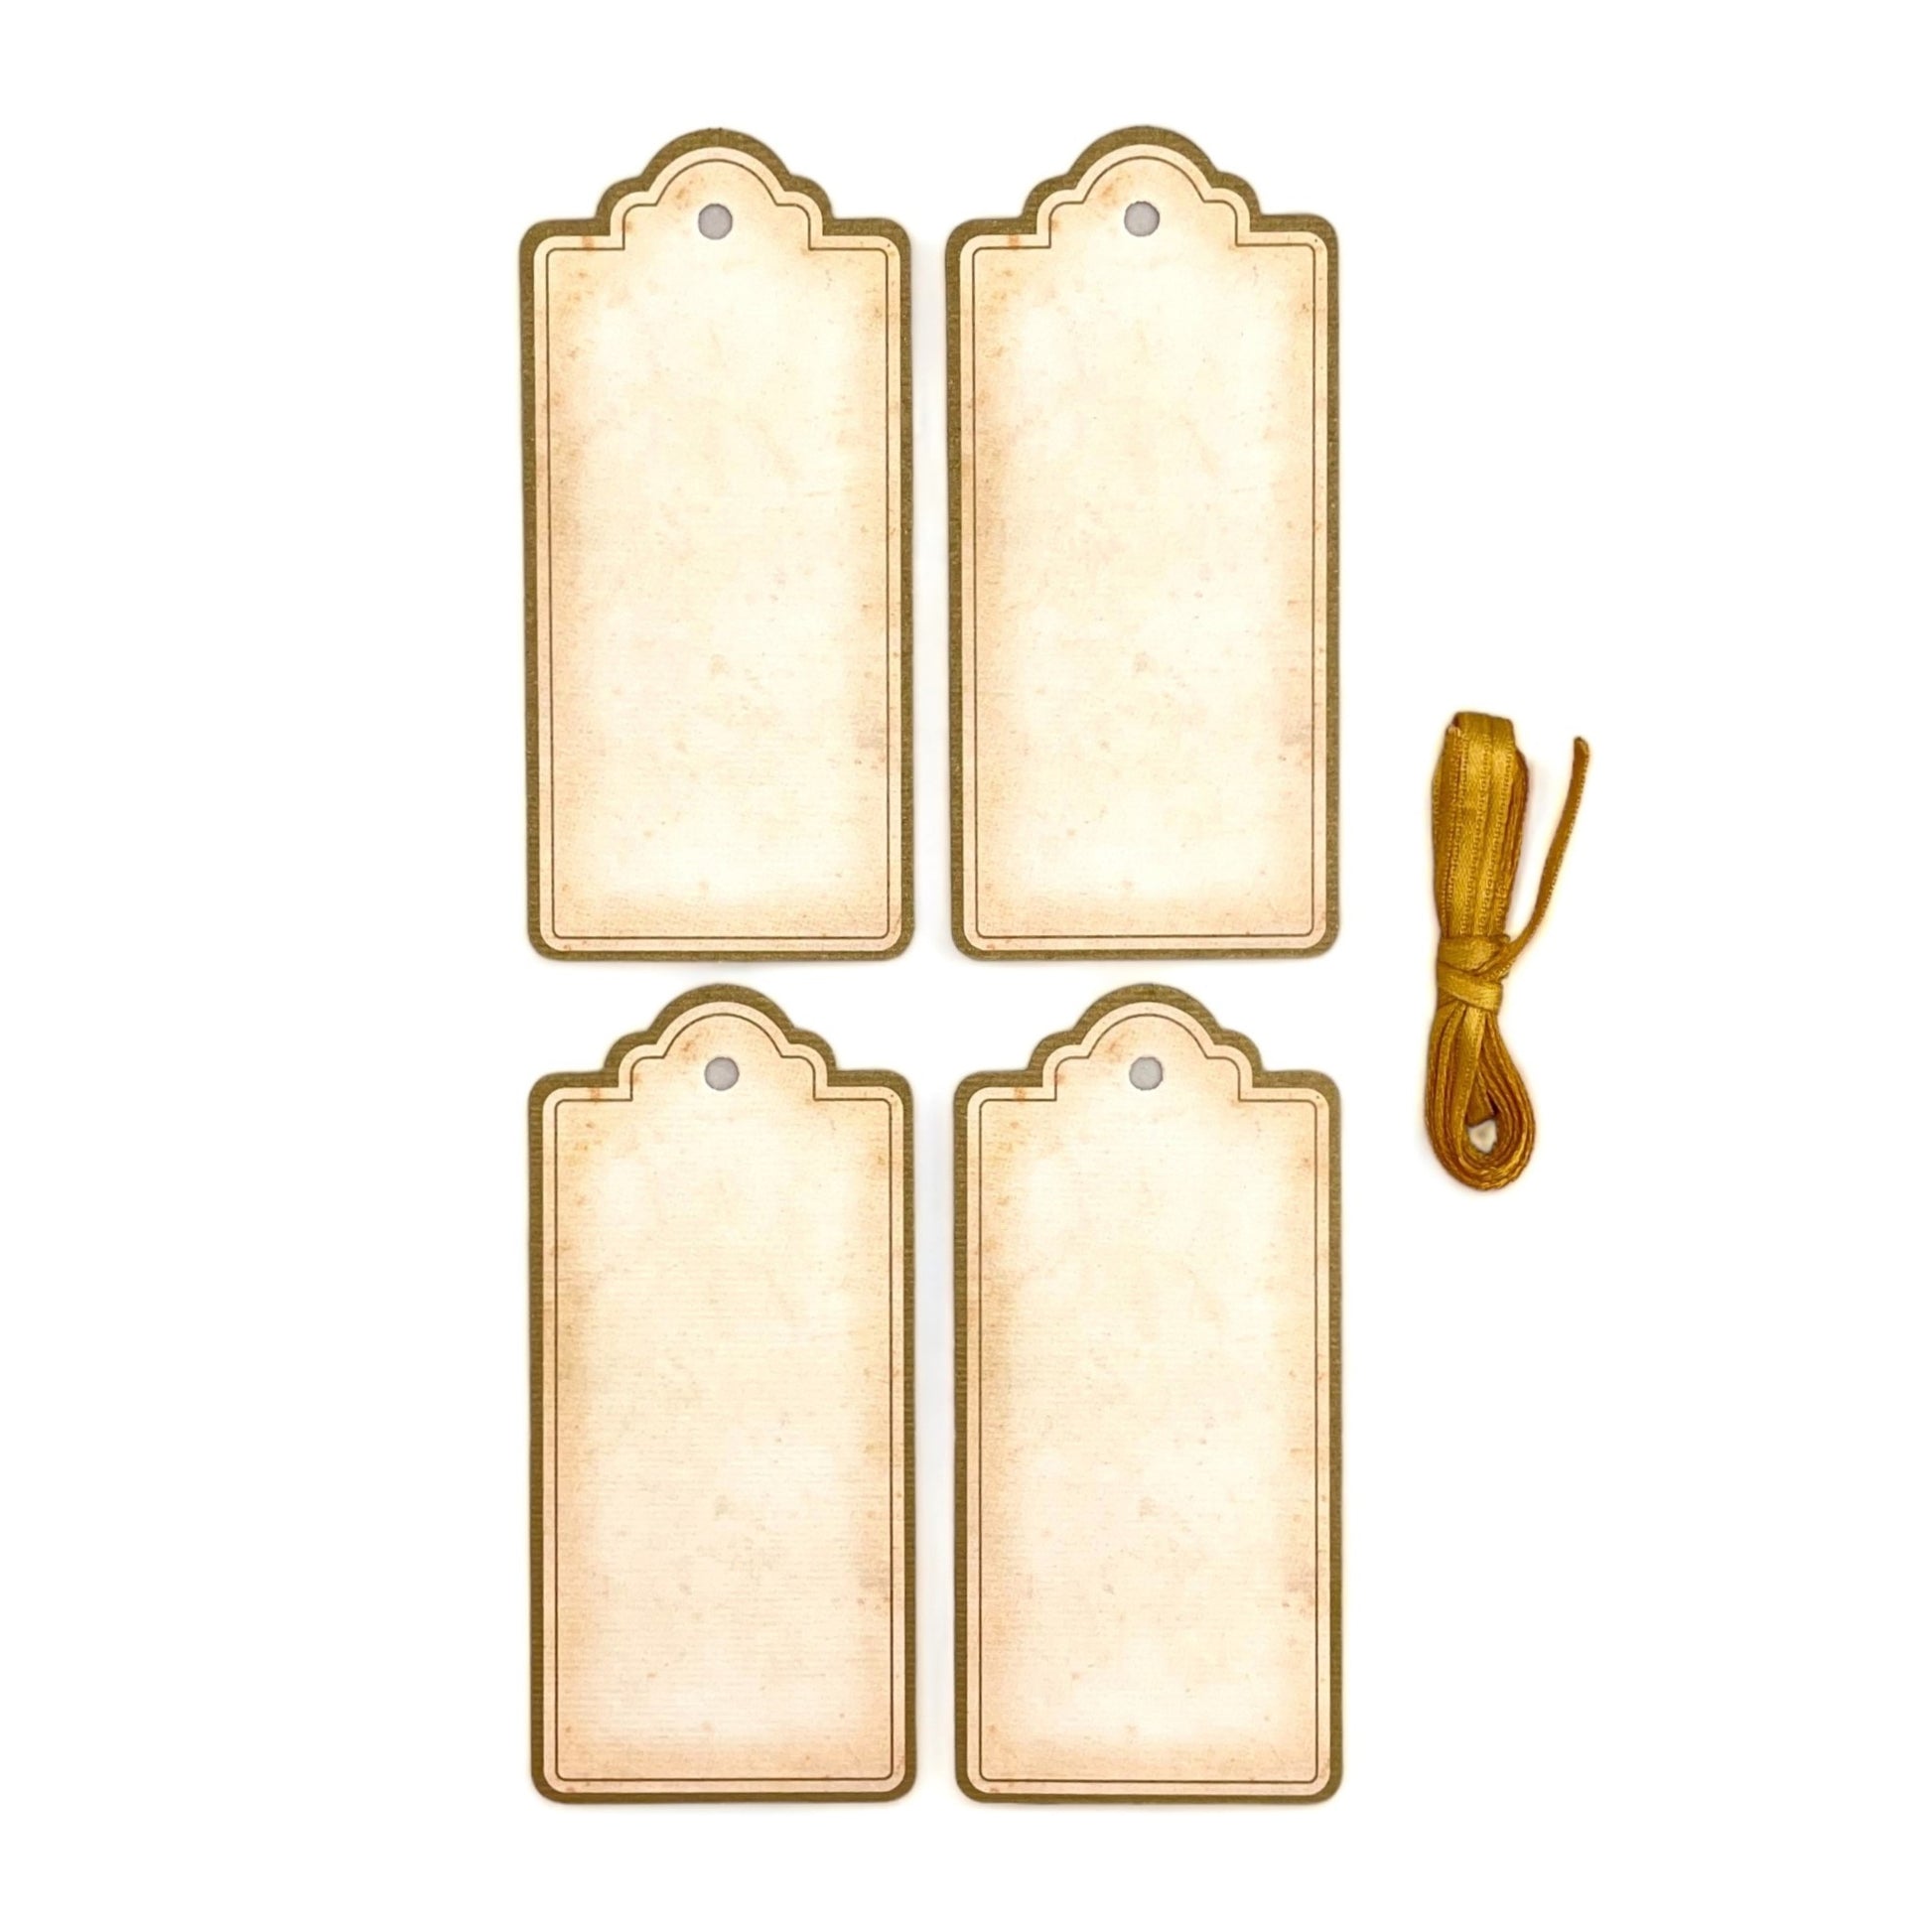 set of 4 vintage style gift tags by Grafiche Tassotti.  Rectangular with sepia colour paper and gold border.  Presented with gold ribbon.